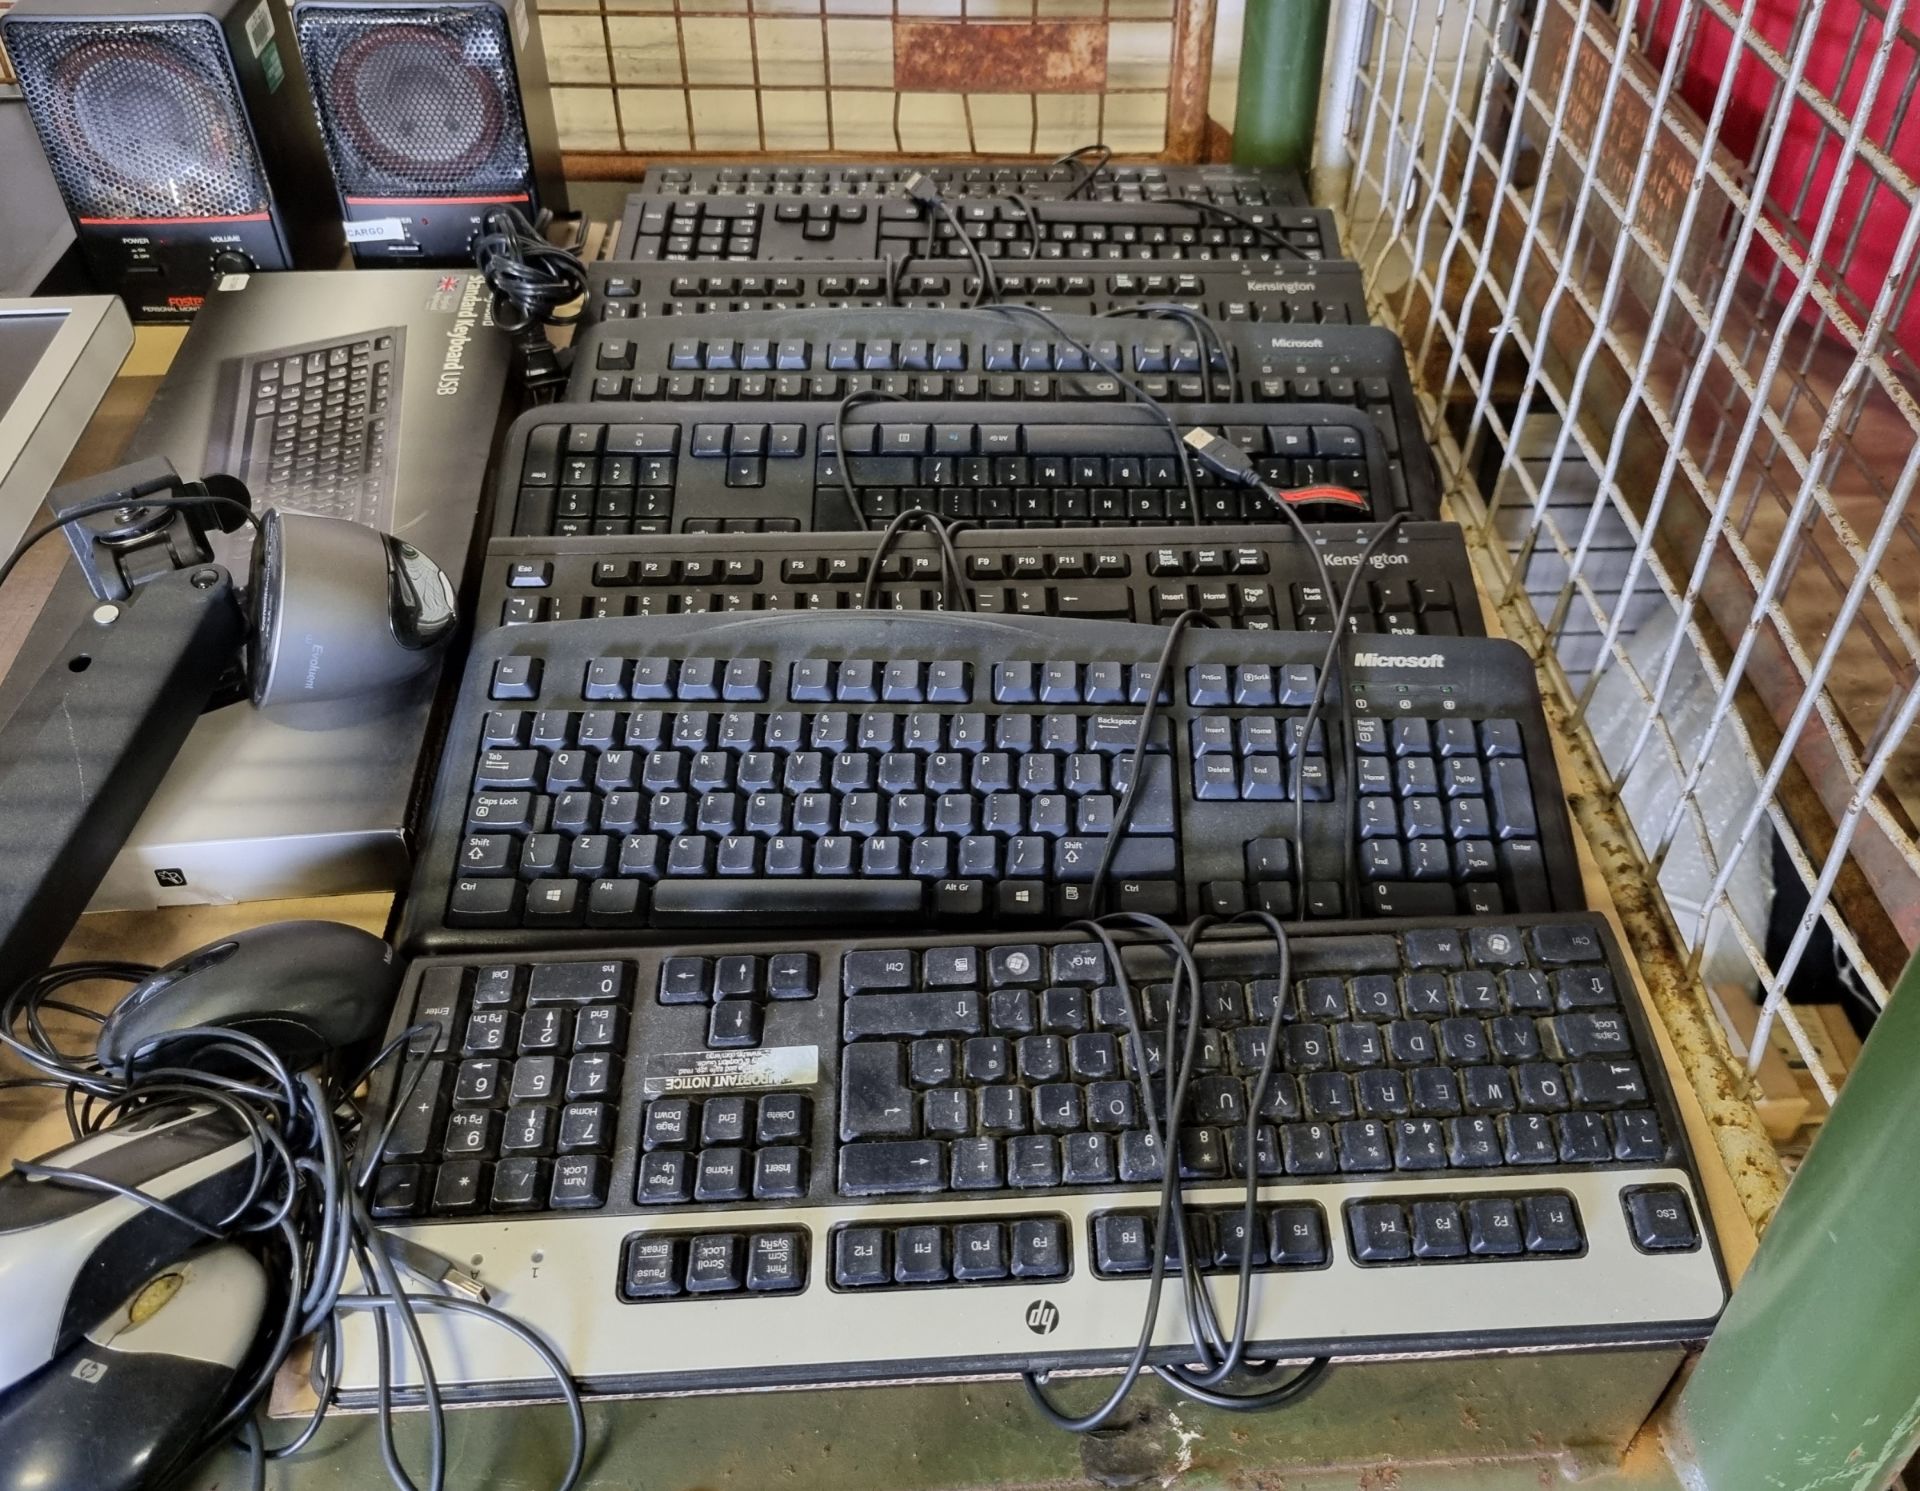 Electrical and computer spares - 9x wired USB keyboards - 5x wired mice - swing arm monitor mount - Image 2 of 5